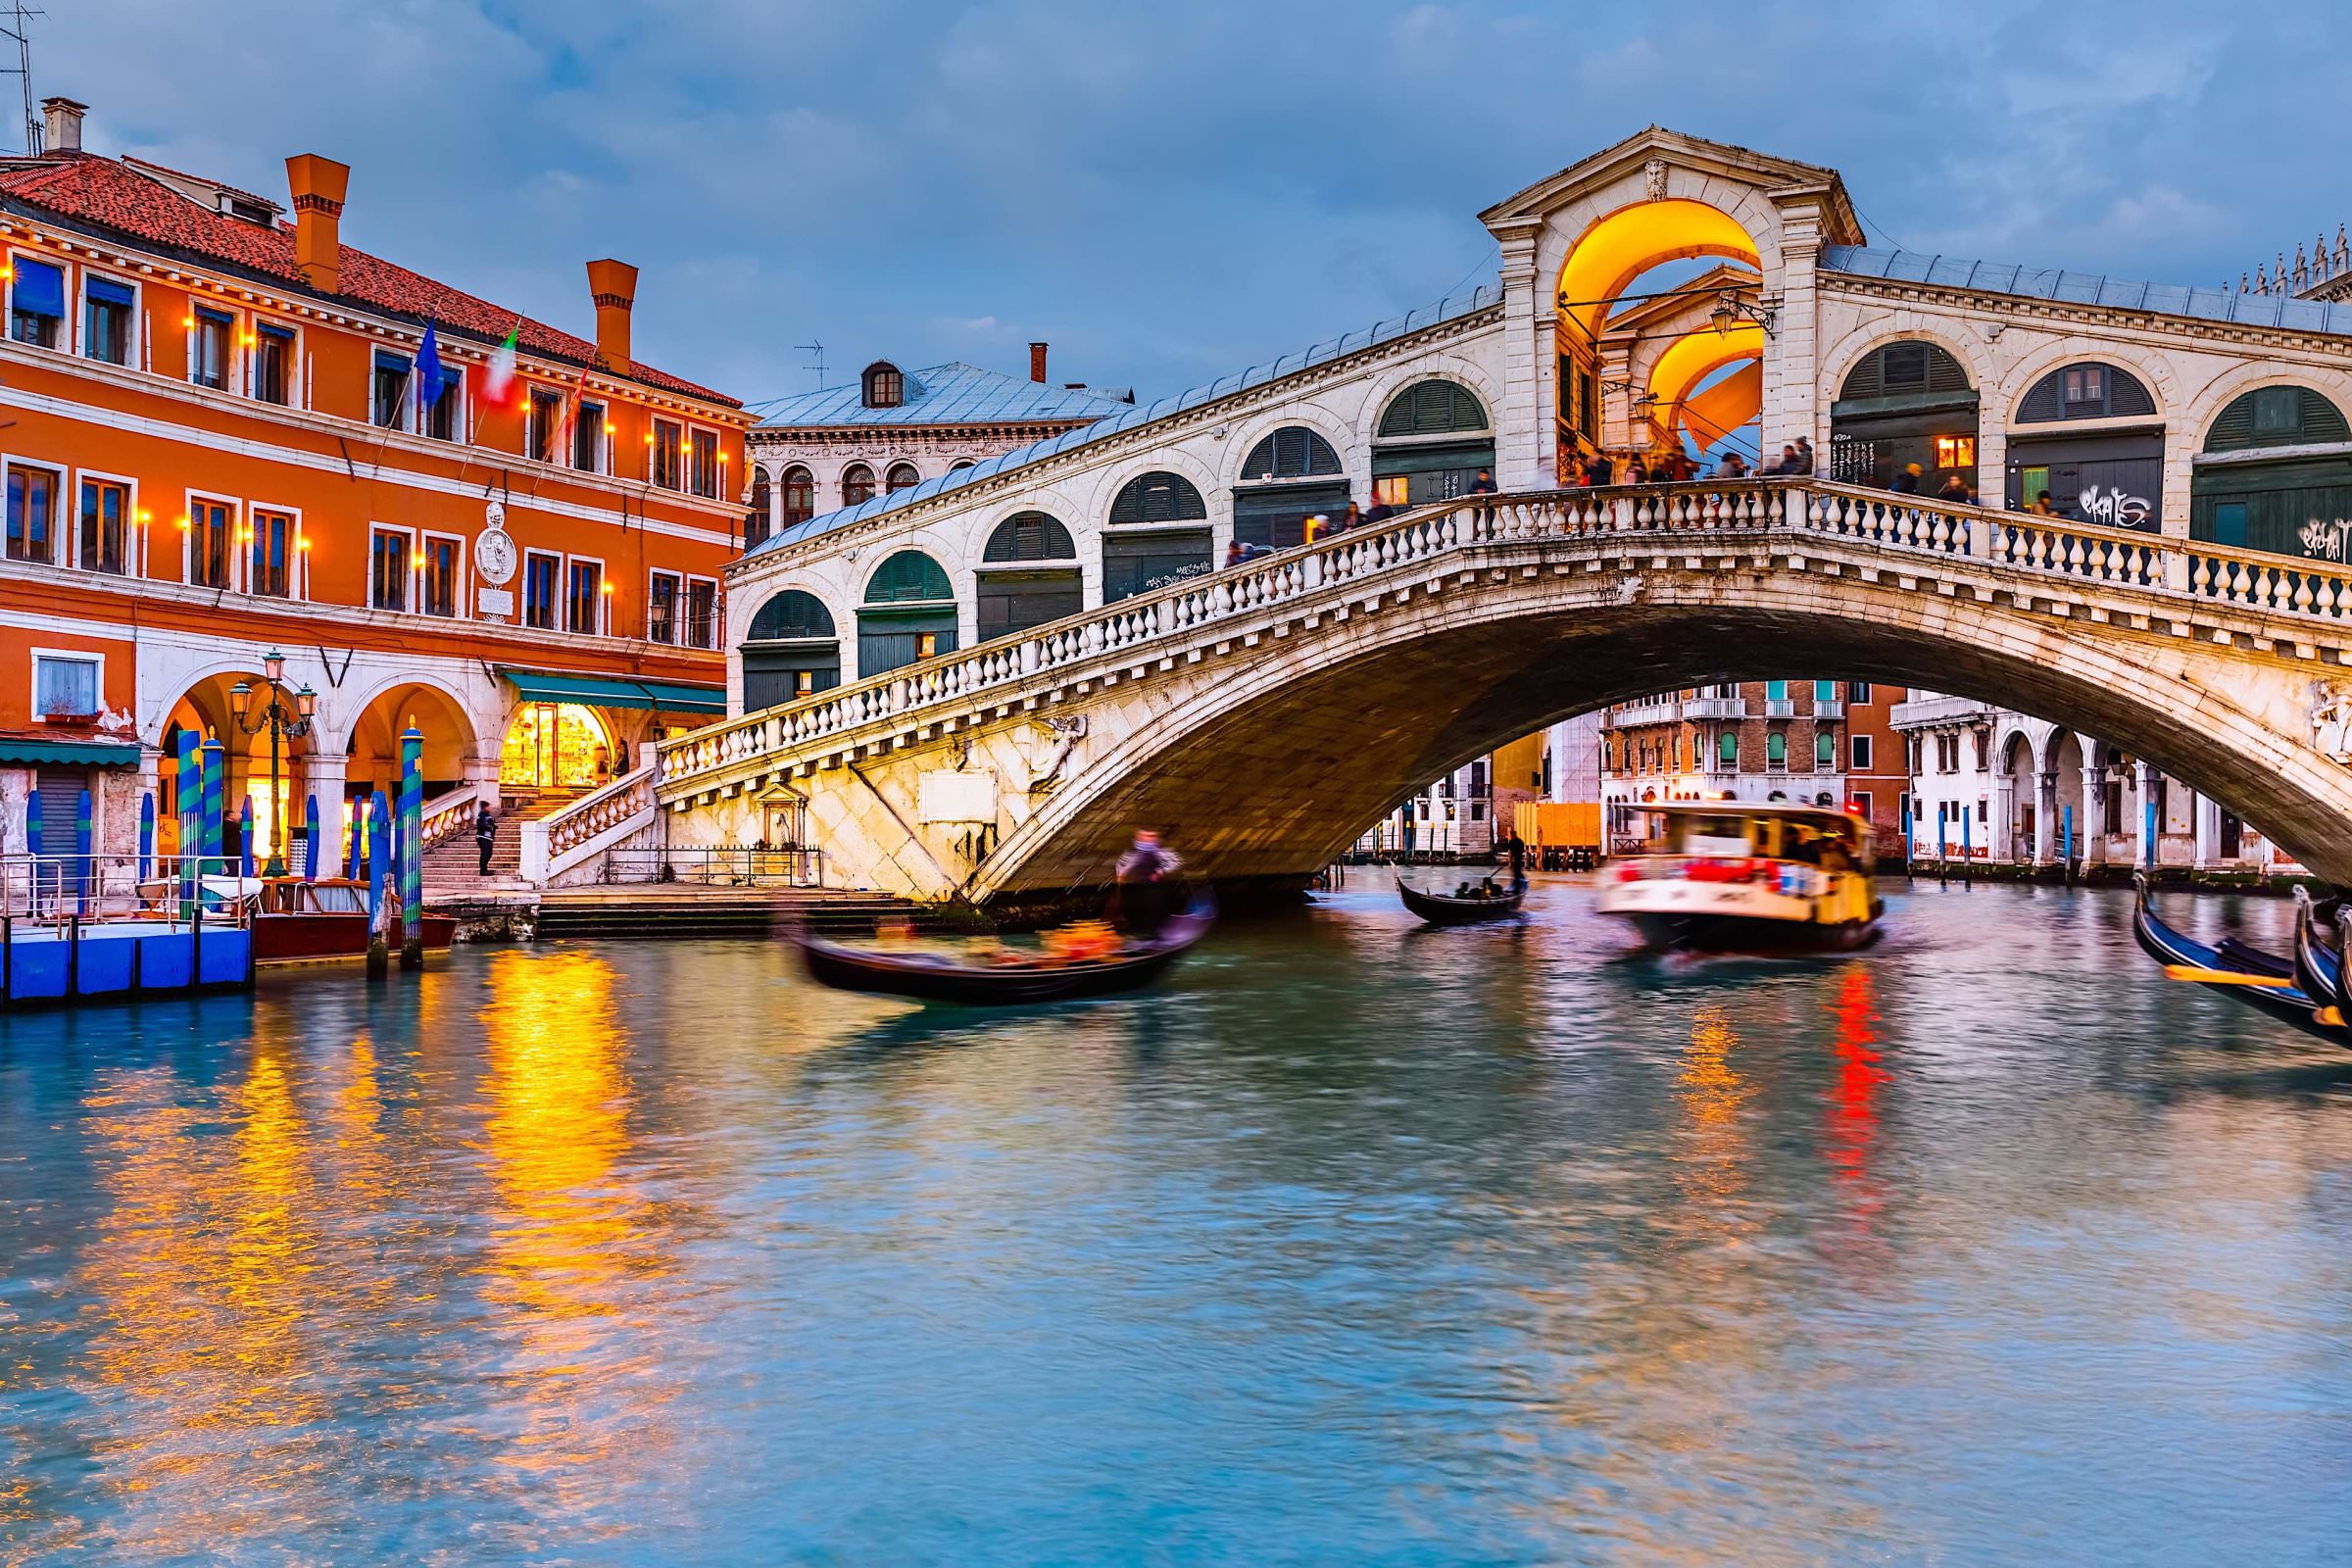 The ideal 10 day Italy vacation for art lovers